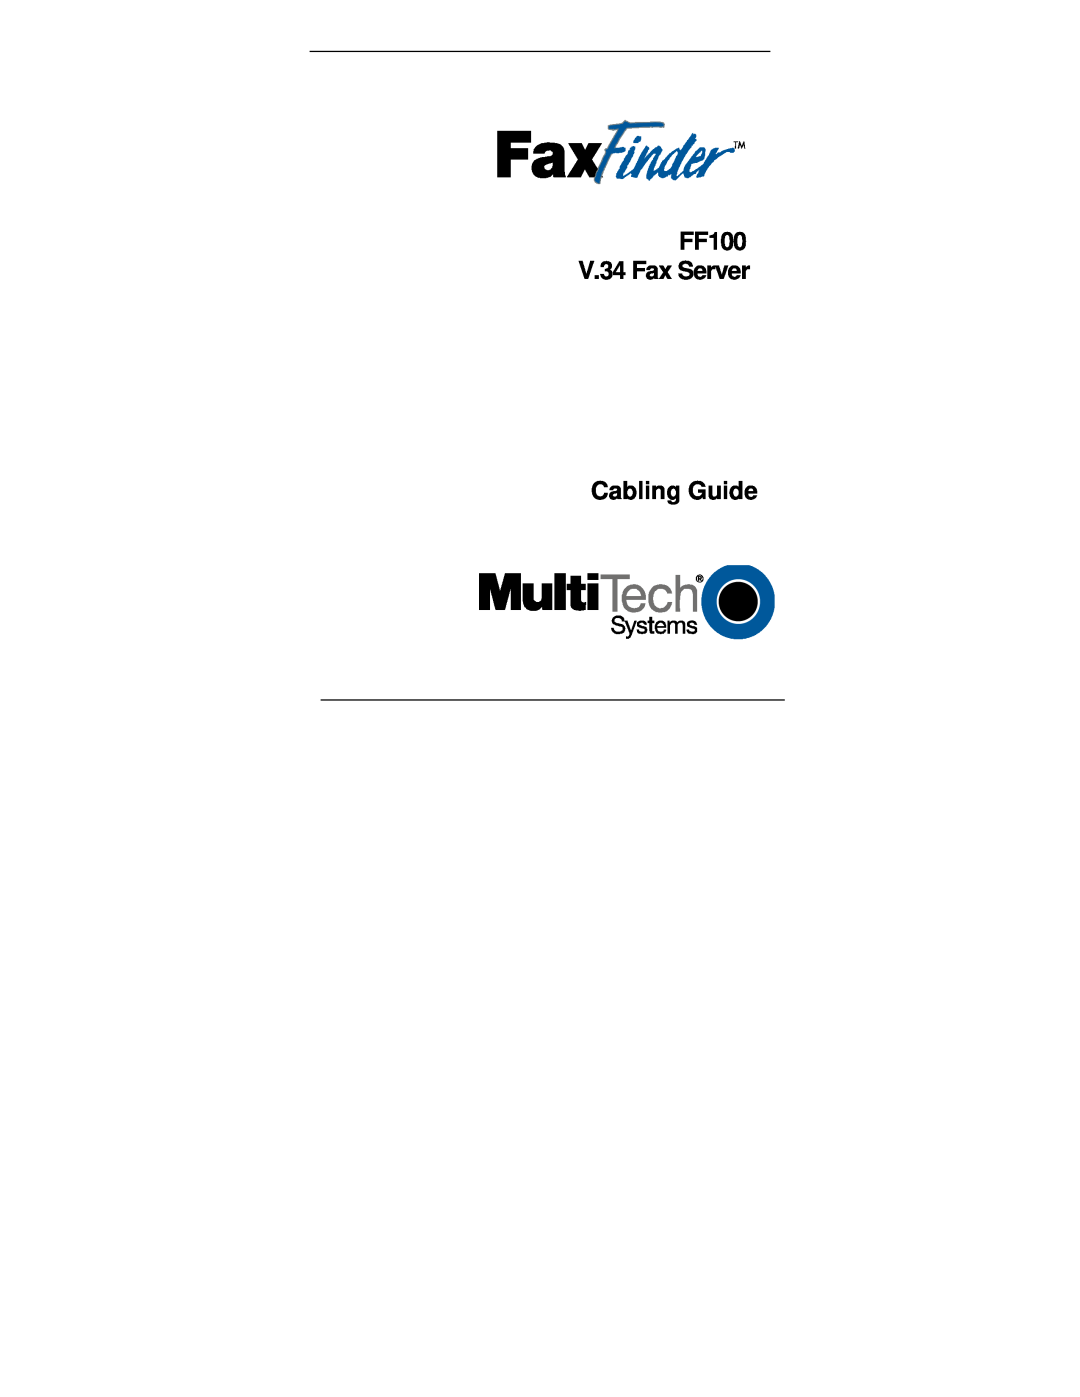 Multi-Tech Systems manual Cabling Guide, FF100 V.34 Fax Server 